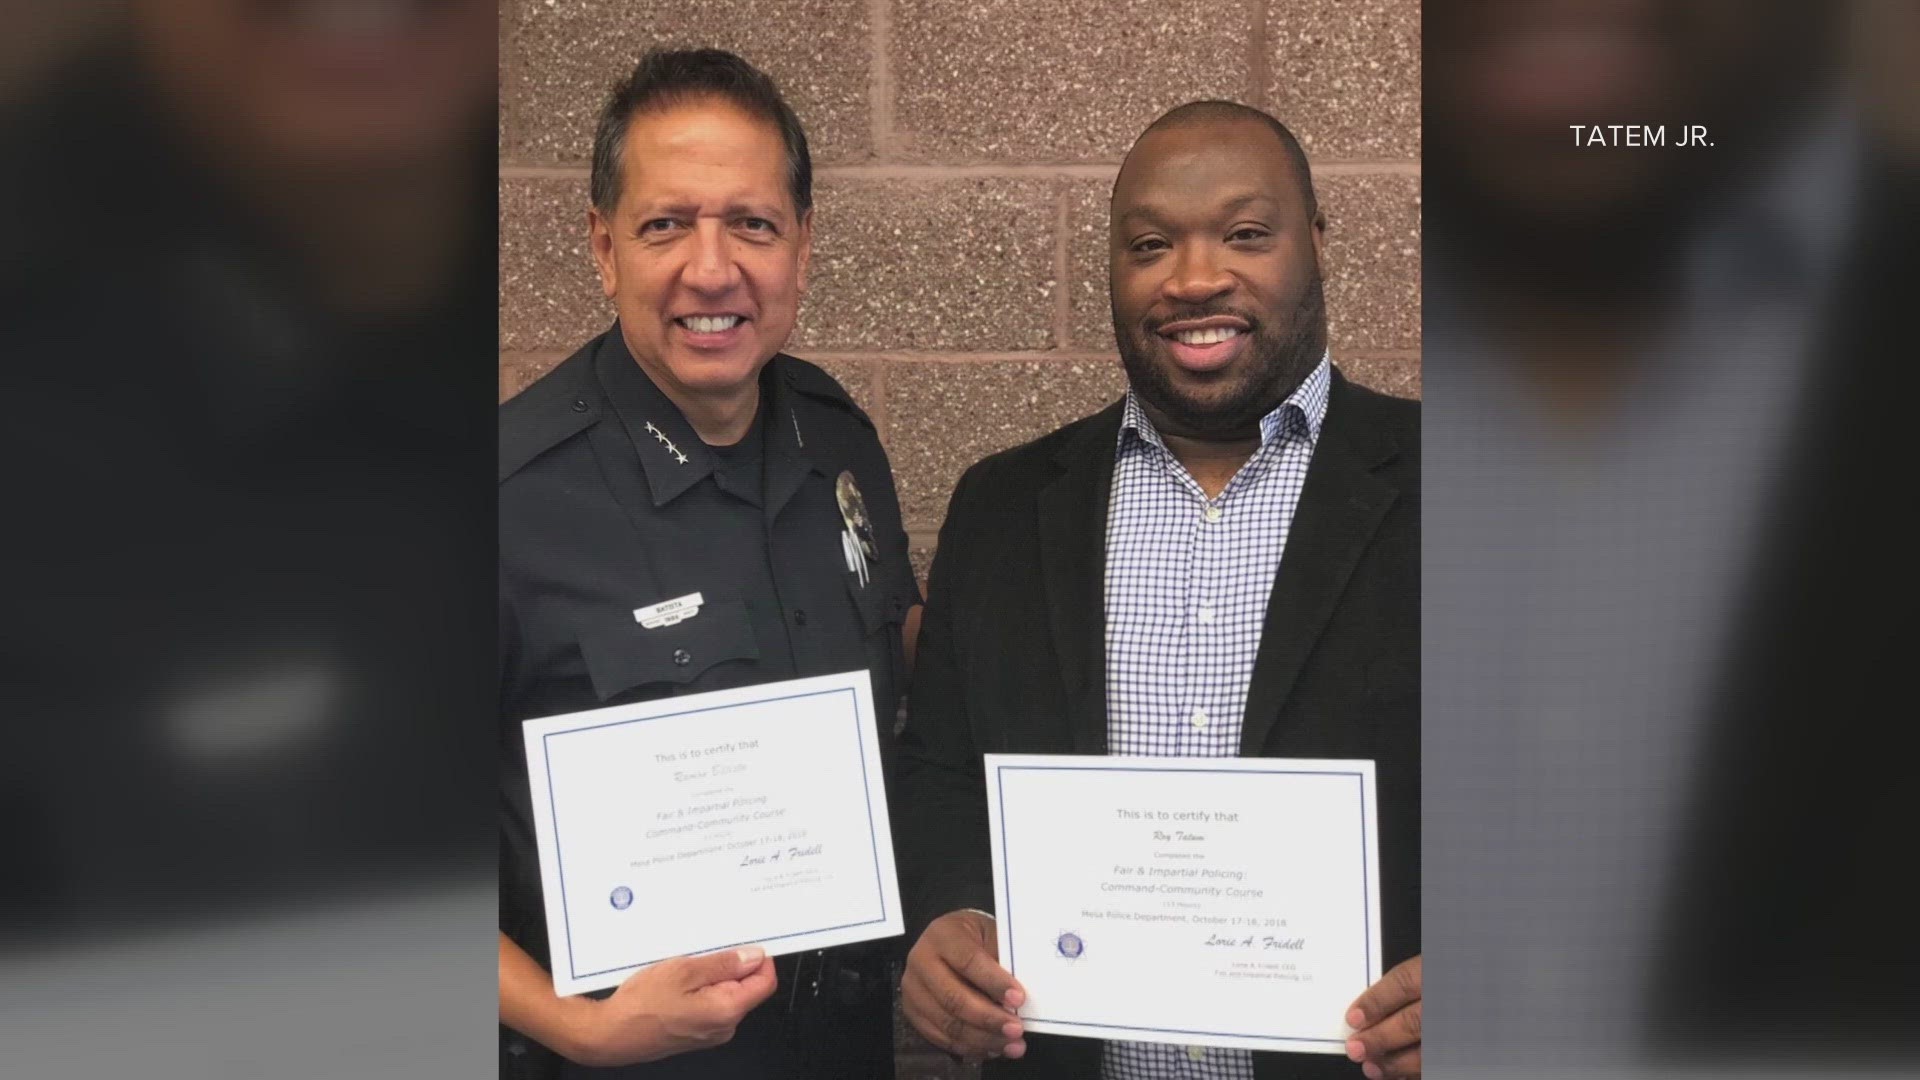 Roy Tatem Jr. is a former East Valley NAACP President and looking to help those in his community. See how he built bridges between police & Black community members.